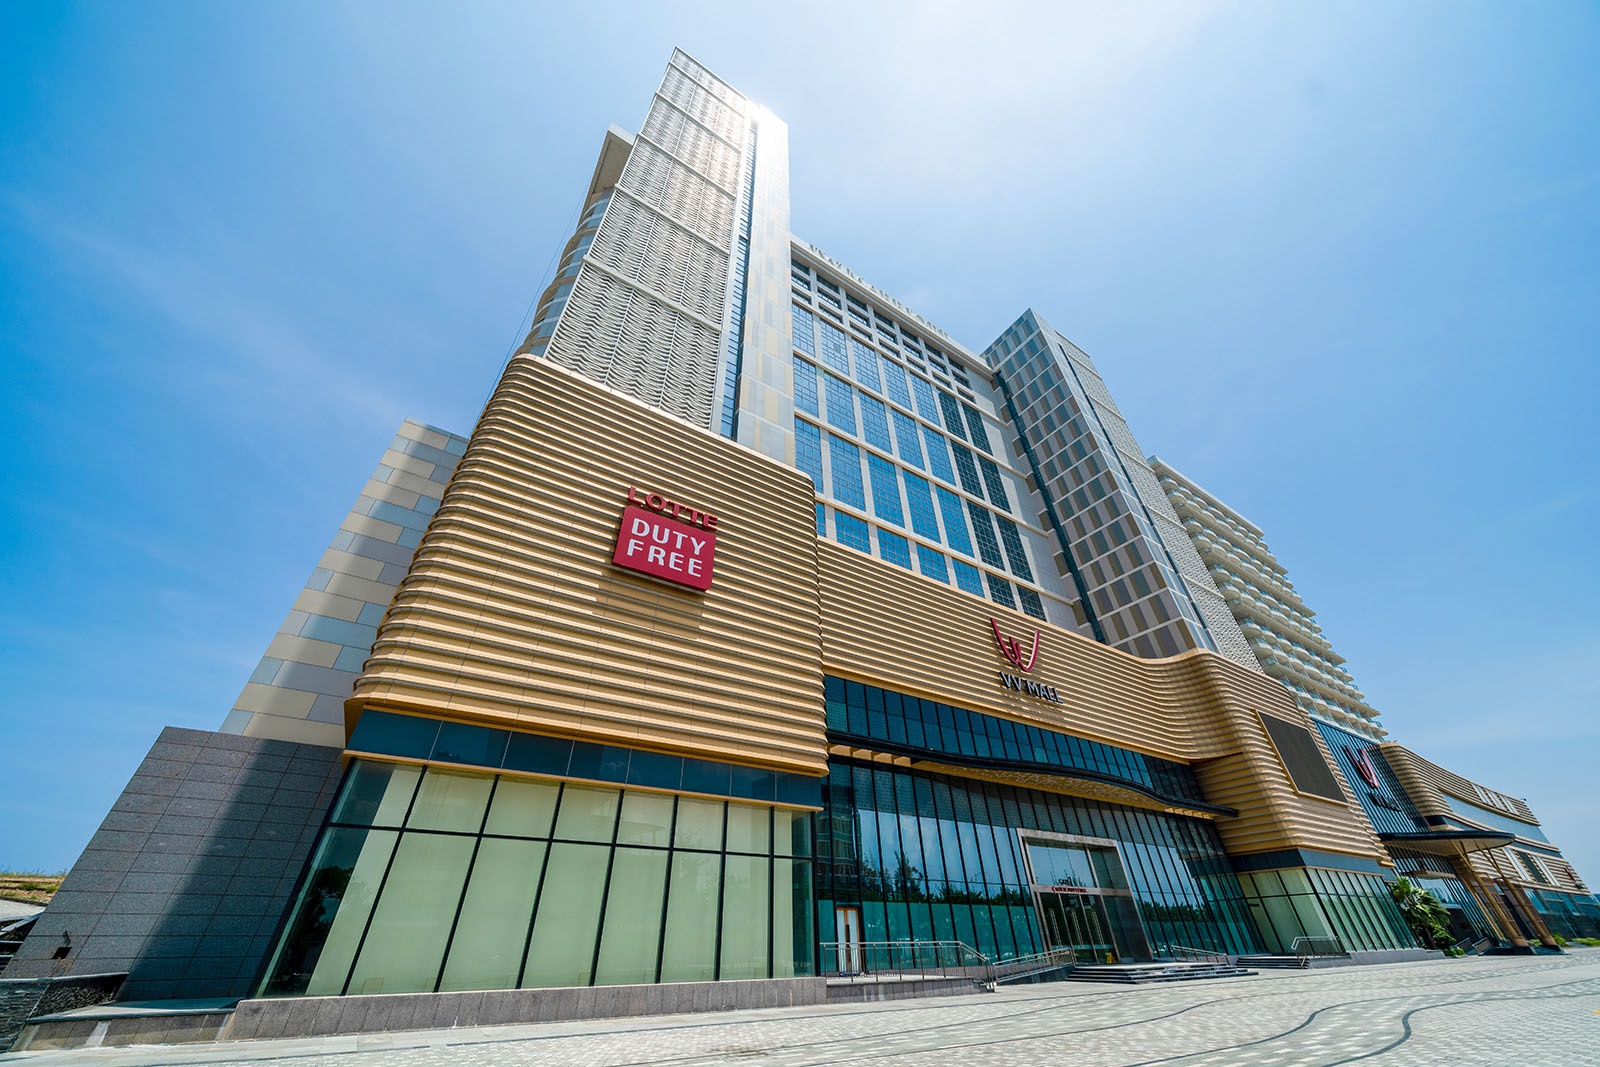 Lotte opens fourth duty-free centre in Danang